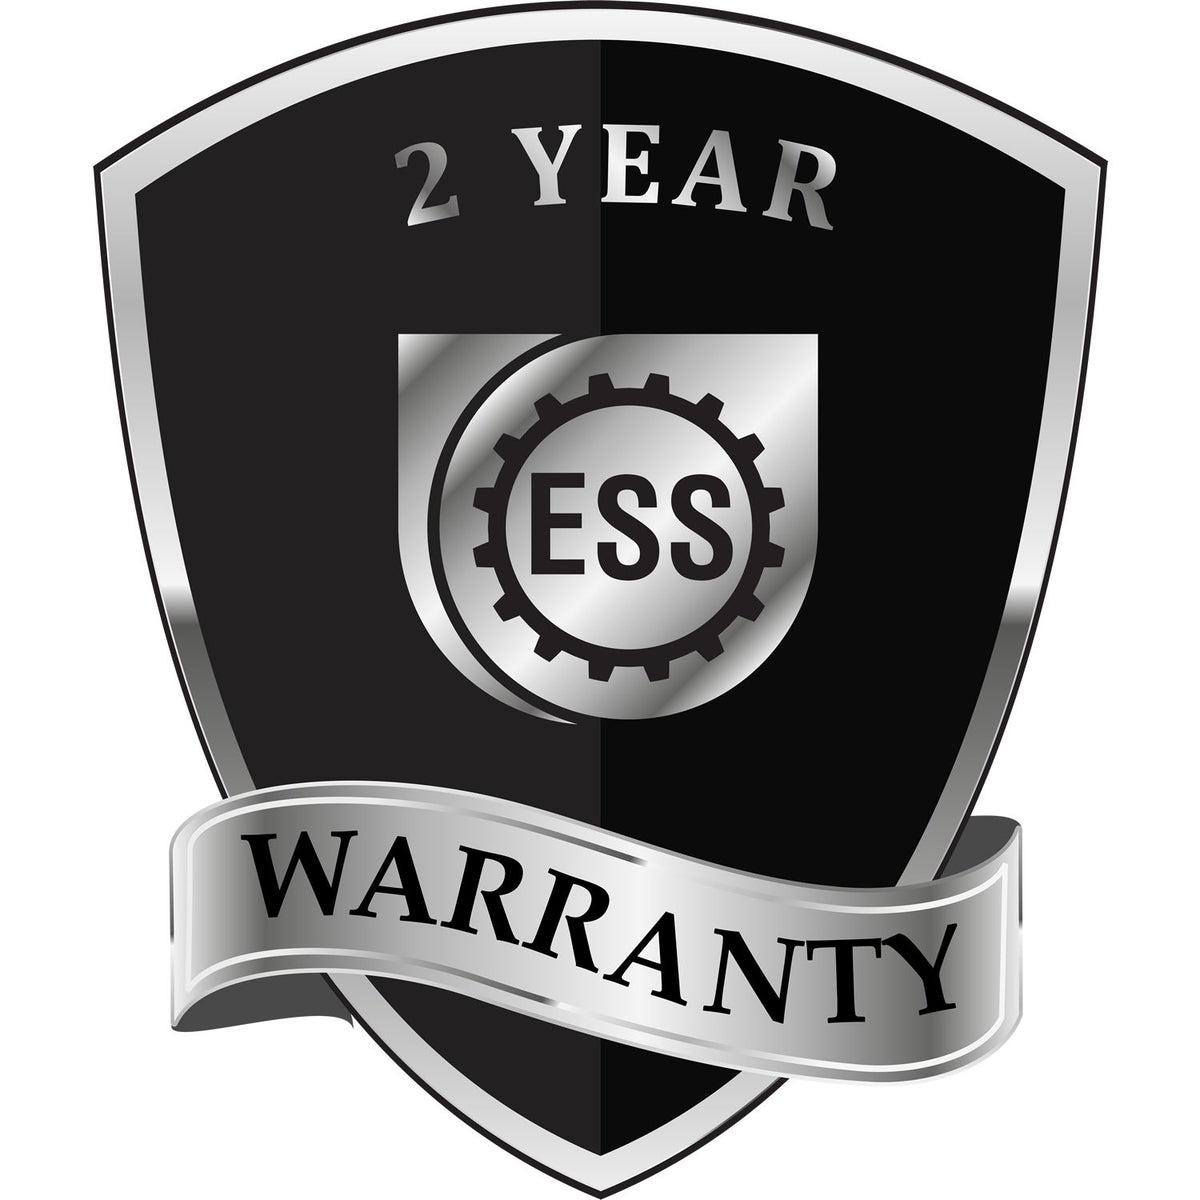 A black and silver badge or emblem showing warranty information for the State of Maine Extended Long Reach Geologist Seal